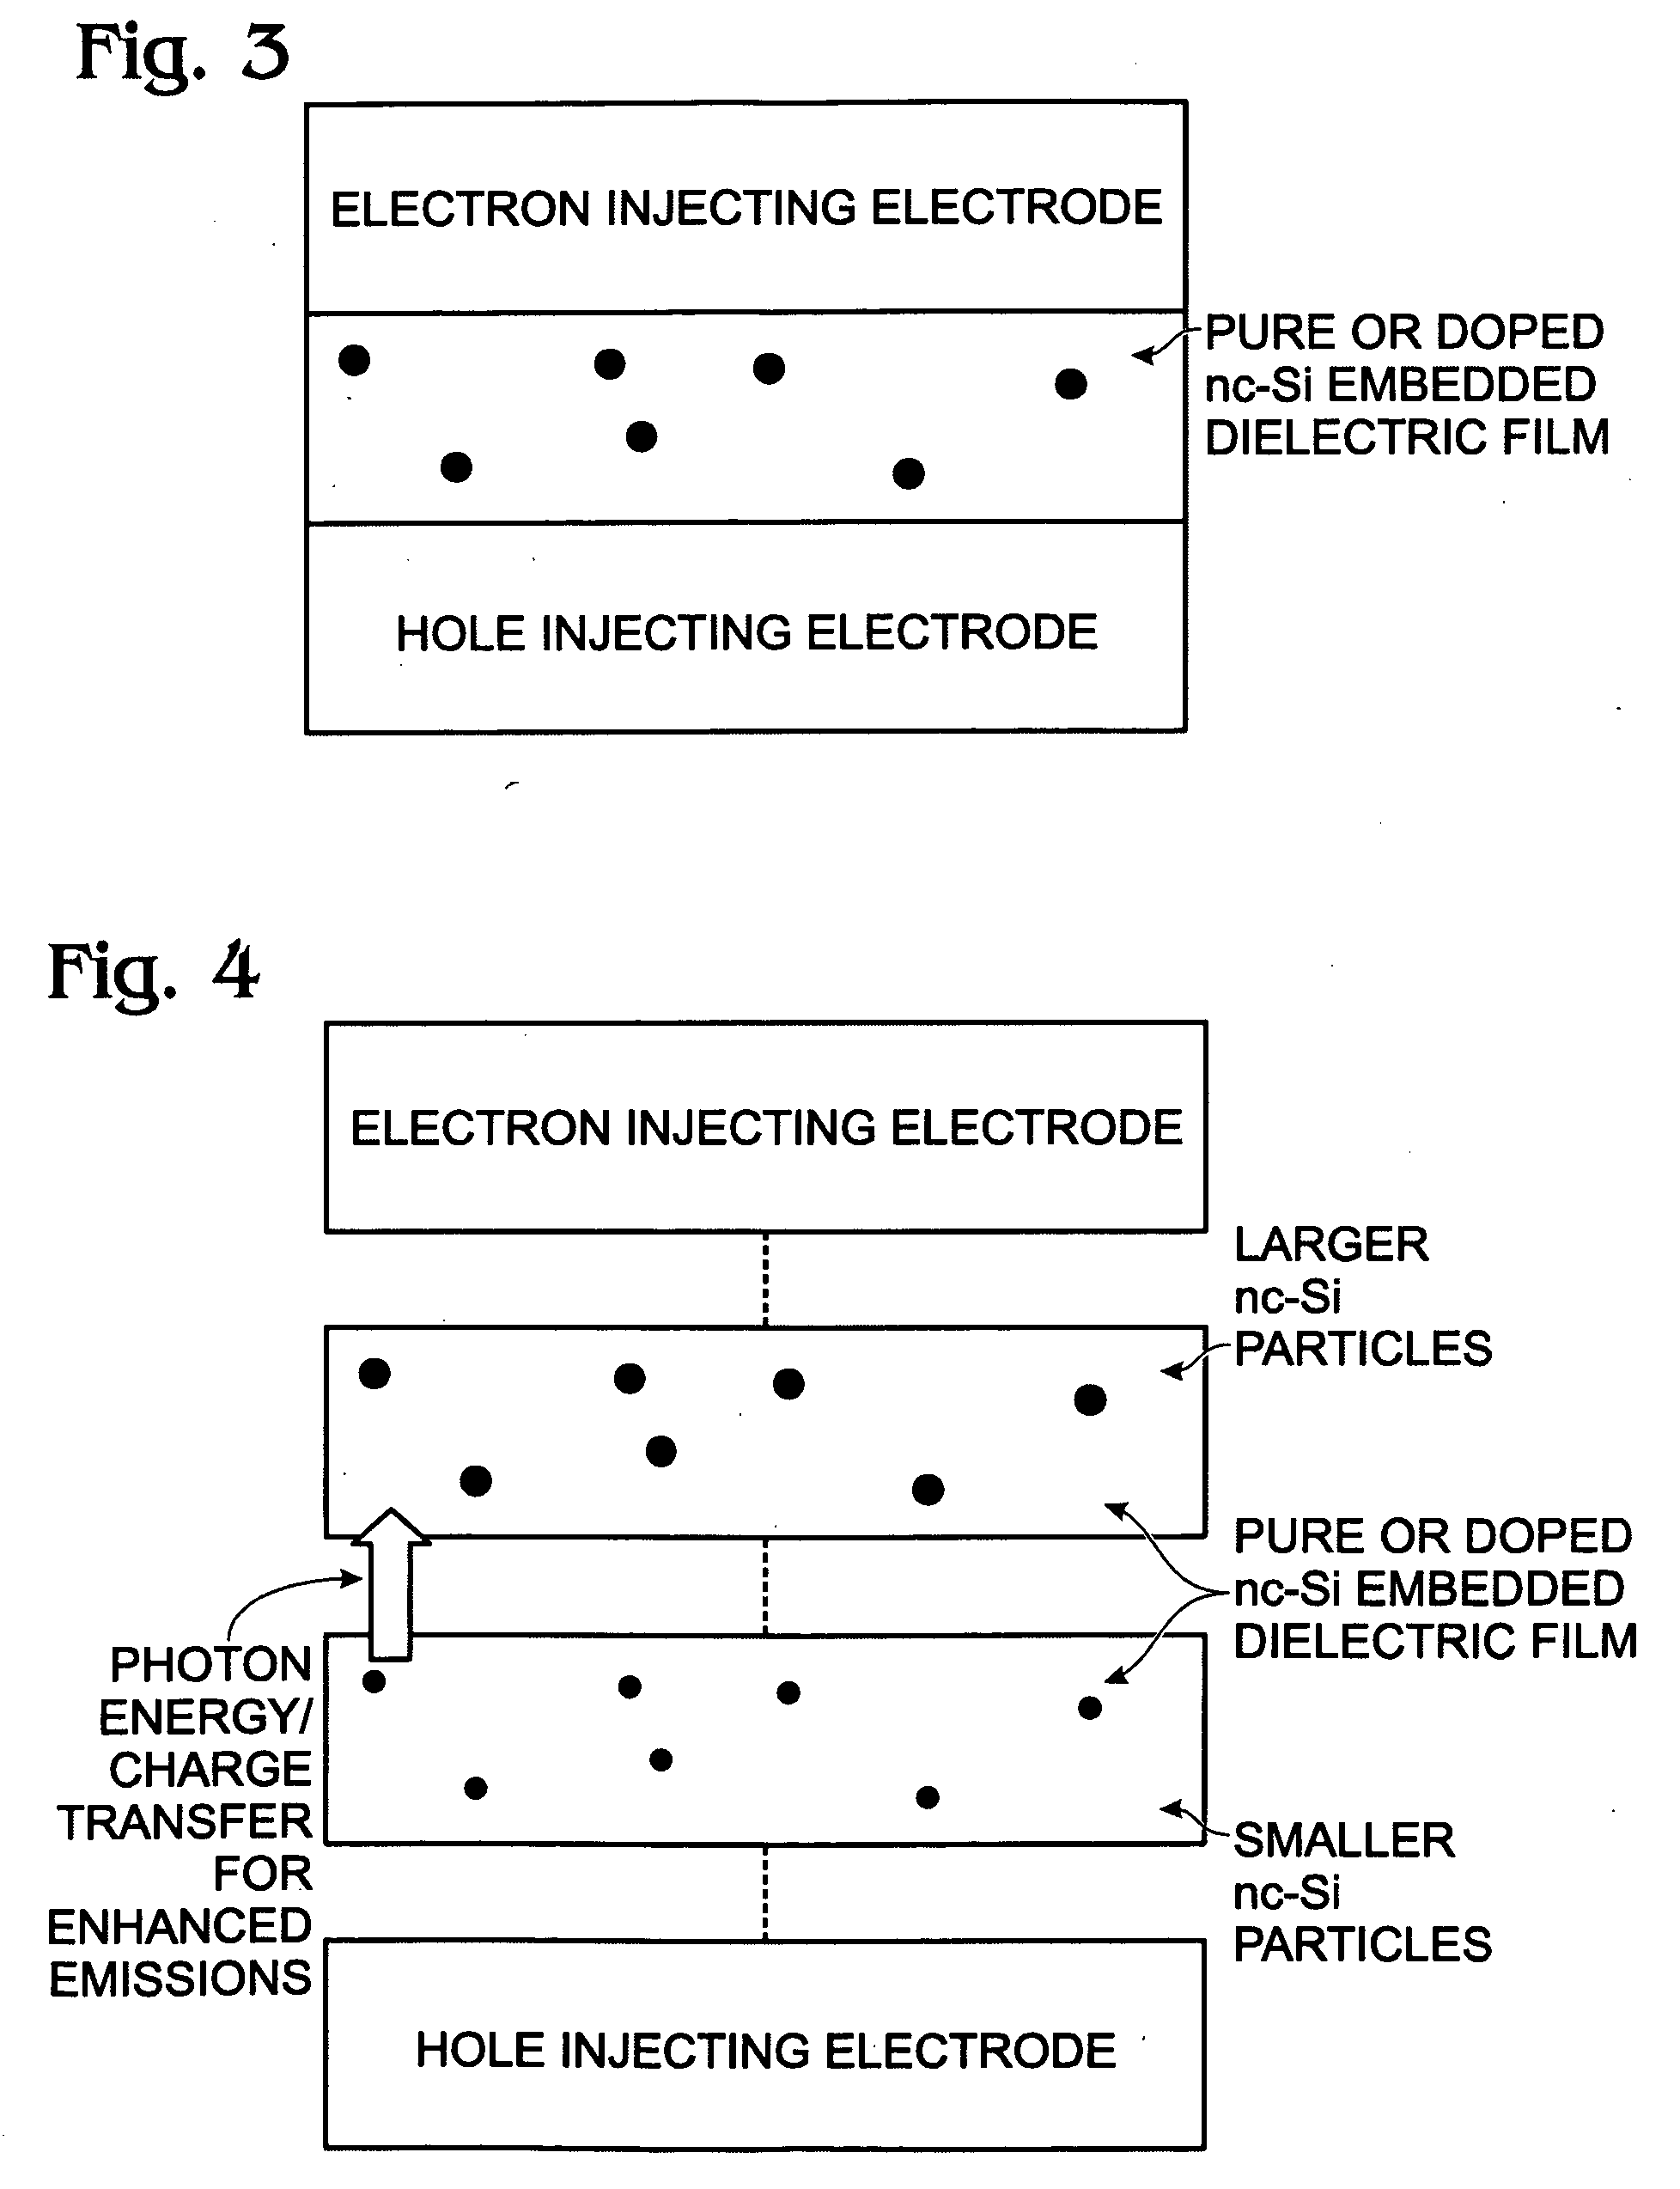 Fabrication of a Semiconductor Nanoparticle Embedded Insulating Film Electroluminescence Device